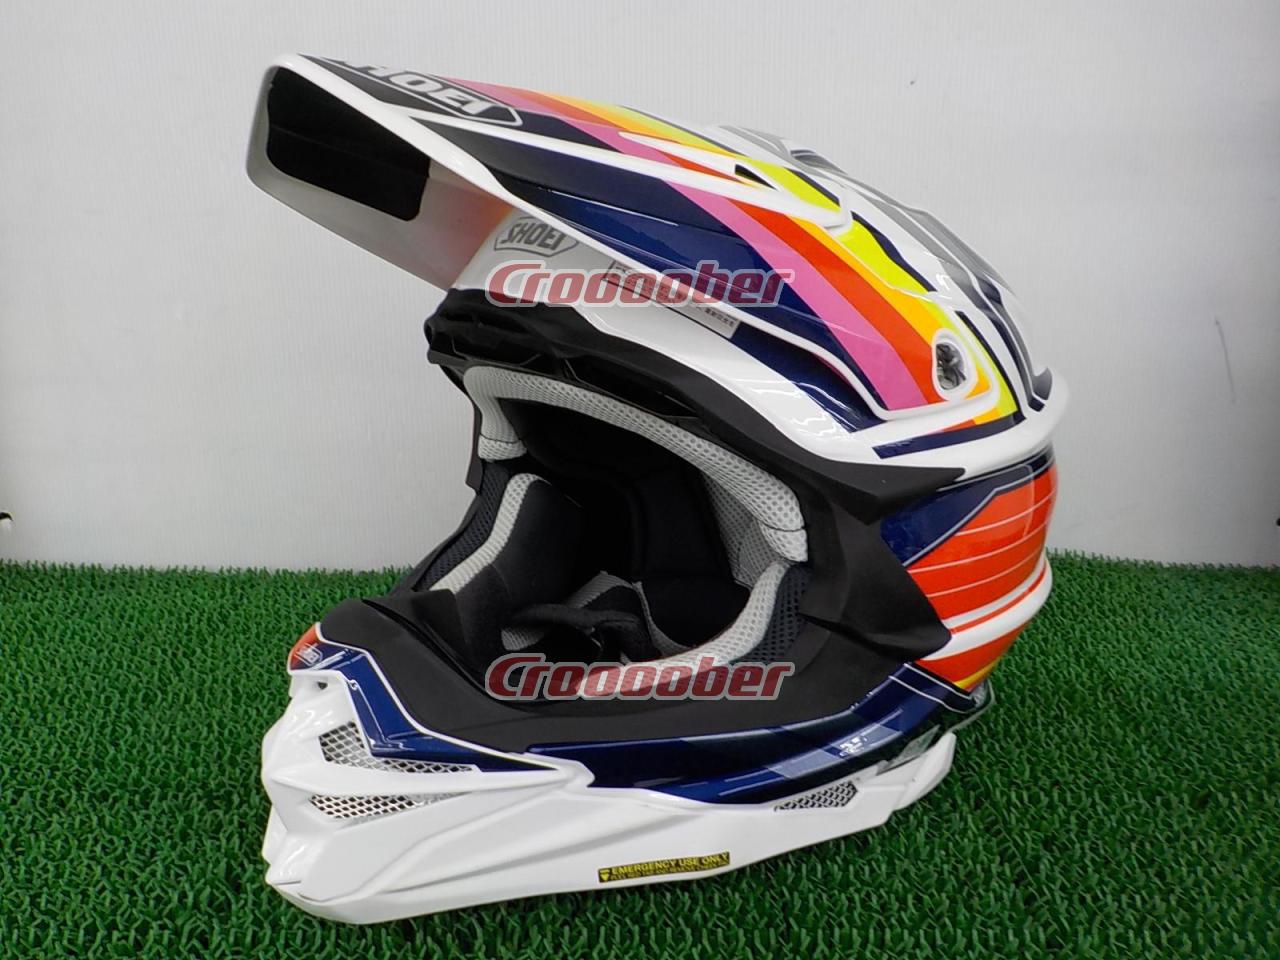 Size: L Shoei VFX-WR Double Are Pinnacle / Off-road Helmet